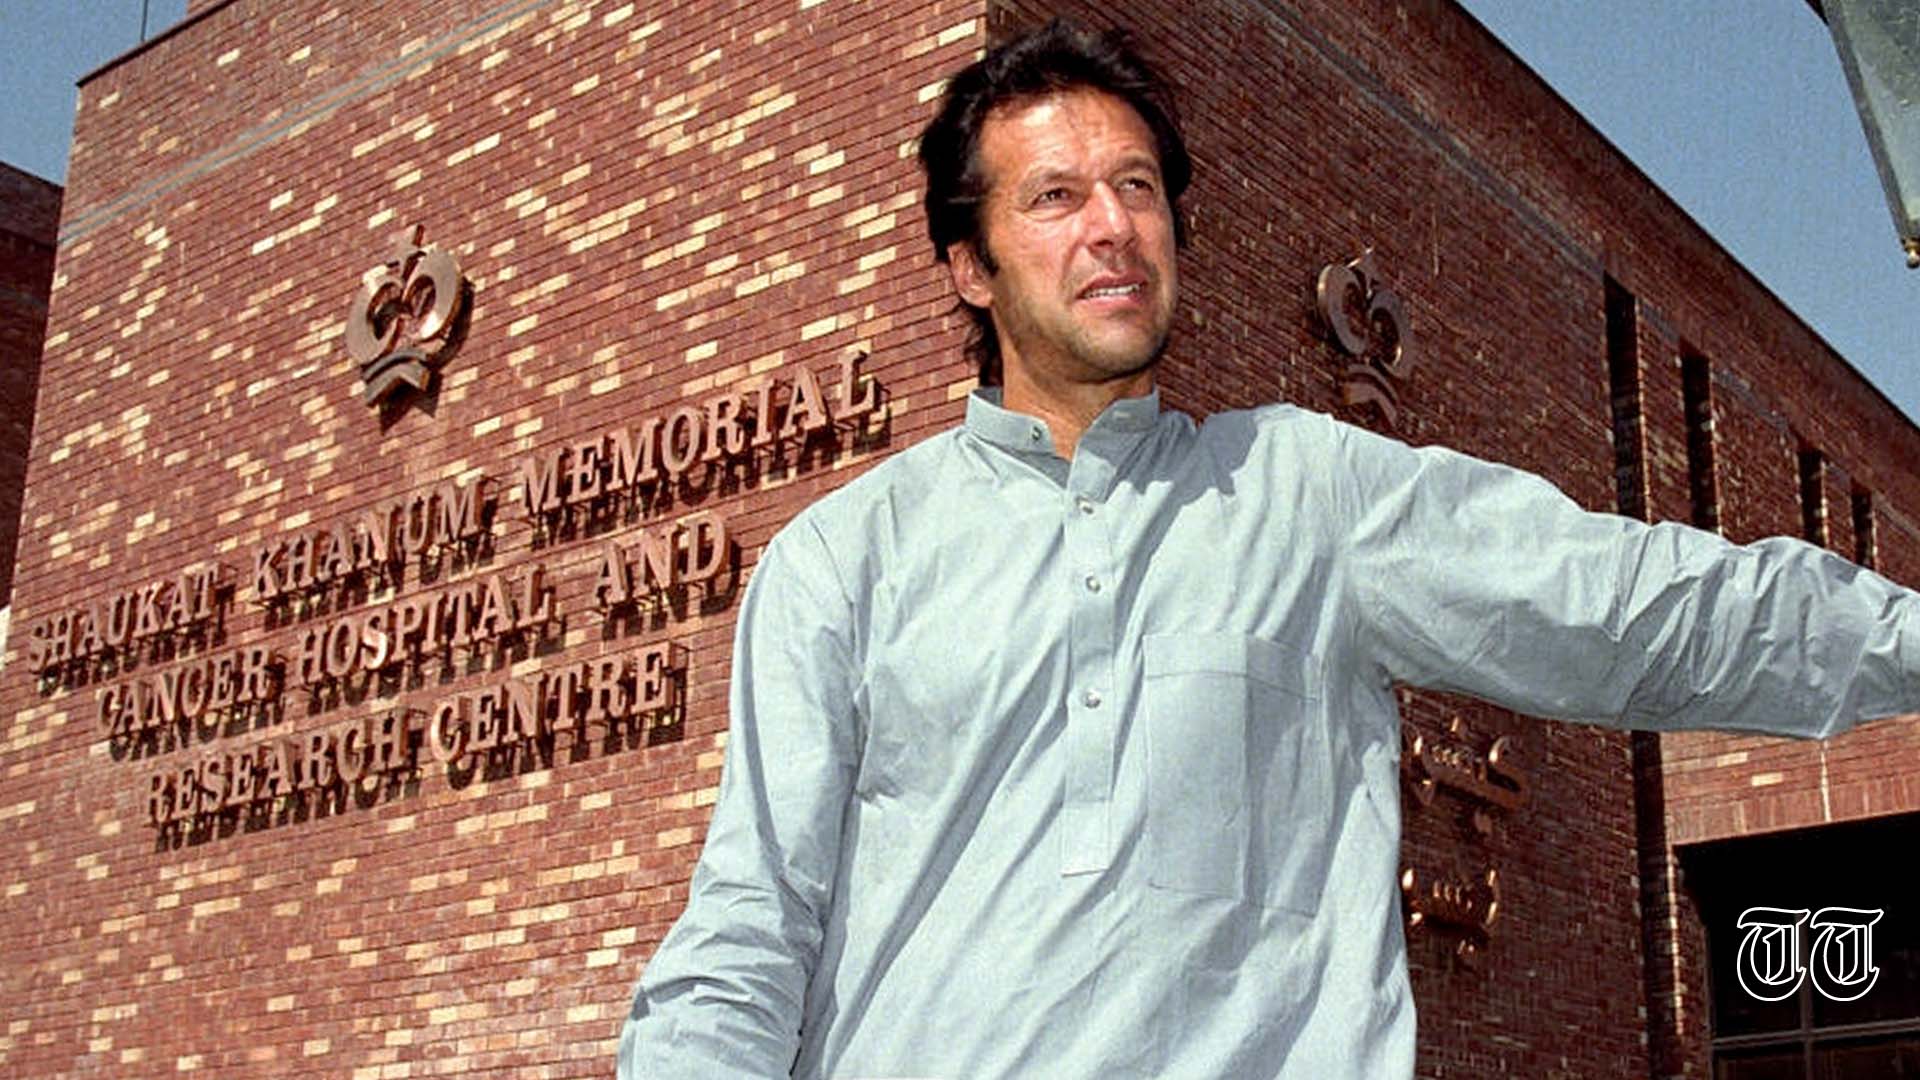 A file photo is shown of PTI president Imran Khan standing outside Shaukat Khanum Memorial Cancer Hospital, Lahore in 1997.